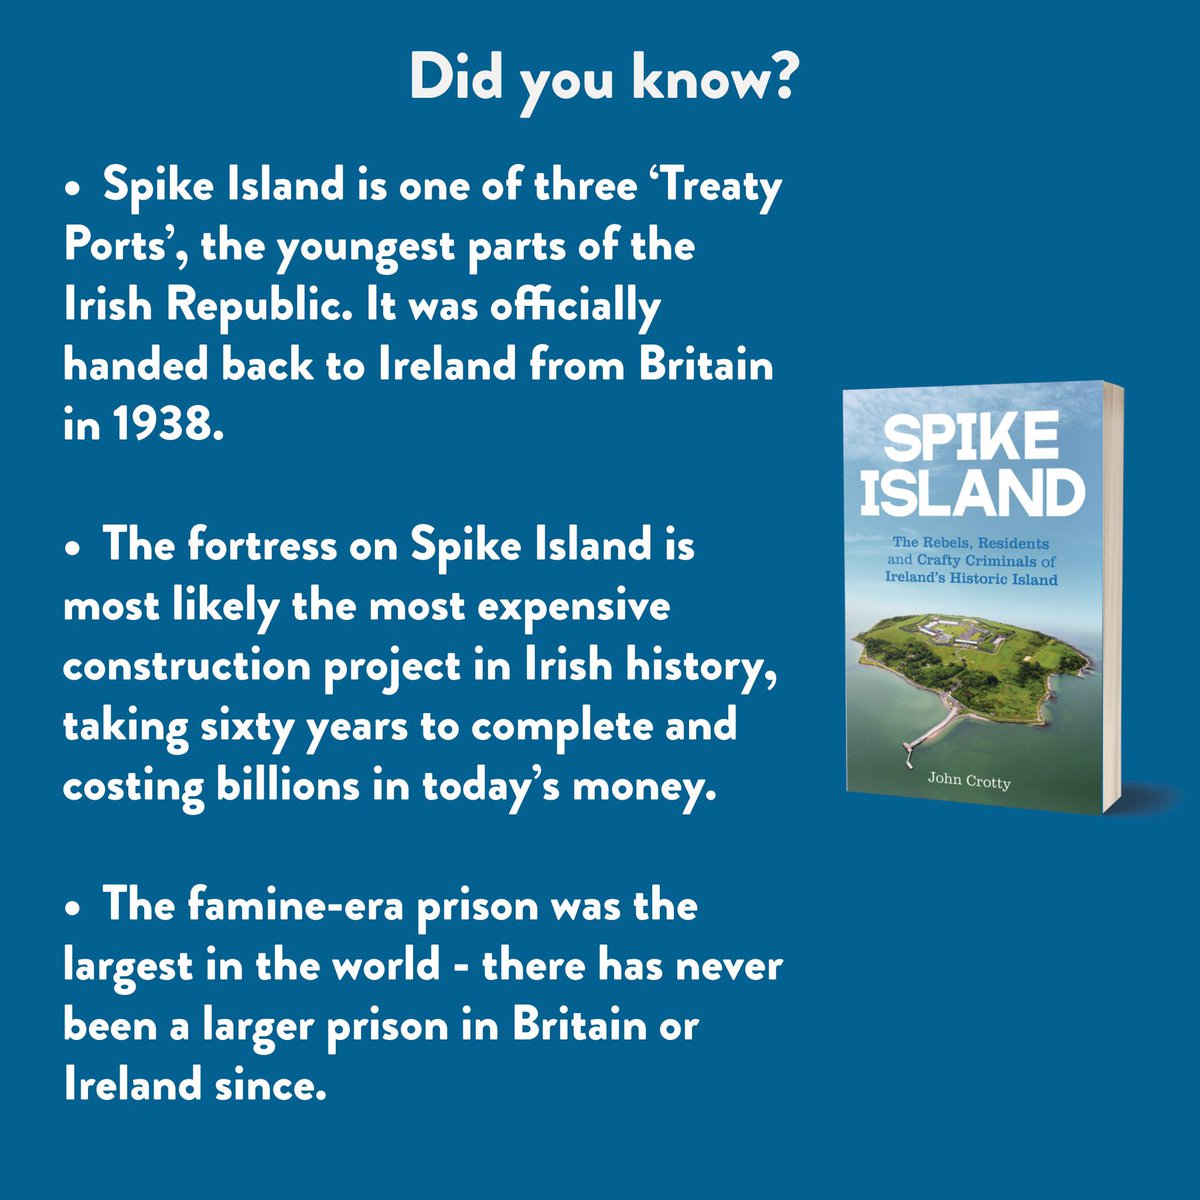 Some fascinating facts from Spike Island include the sheer scale of the 1804 fortress & 1847 prison Both were products of an Empire unbound by financial restraint Seeking to consolidate its grip on Ireland & ascendency It took until 1938 to end a 160 year military occupation